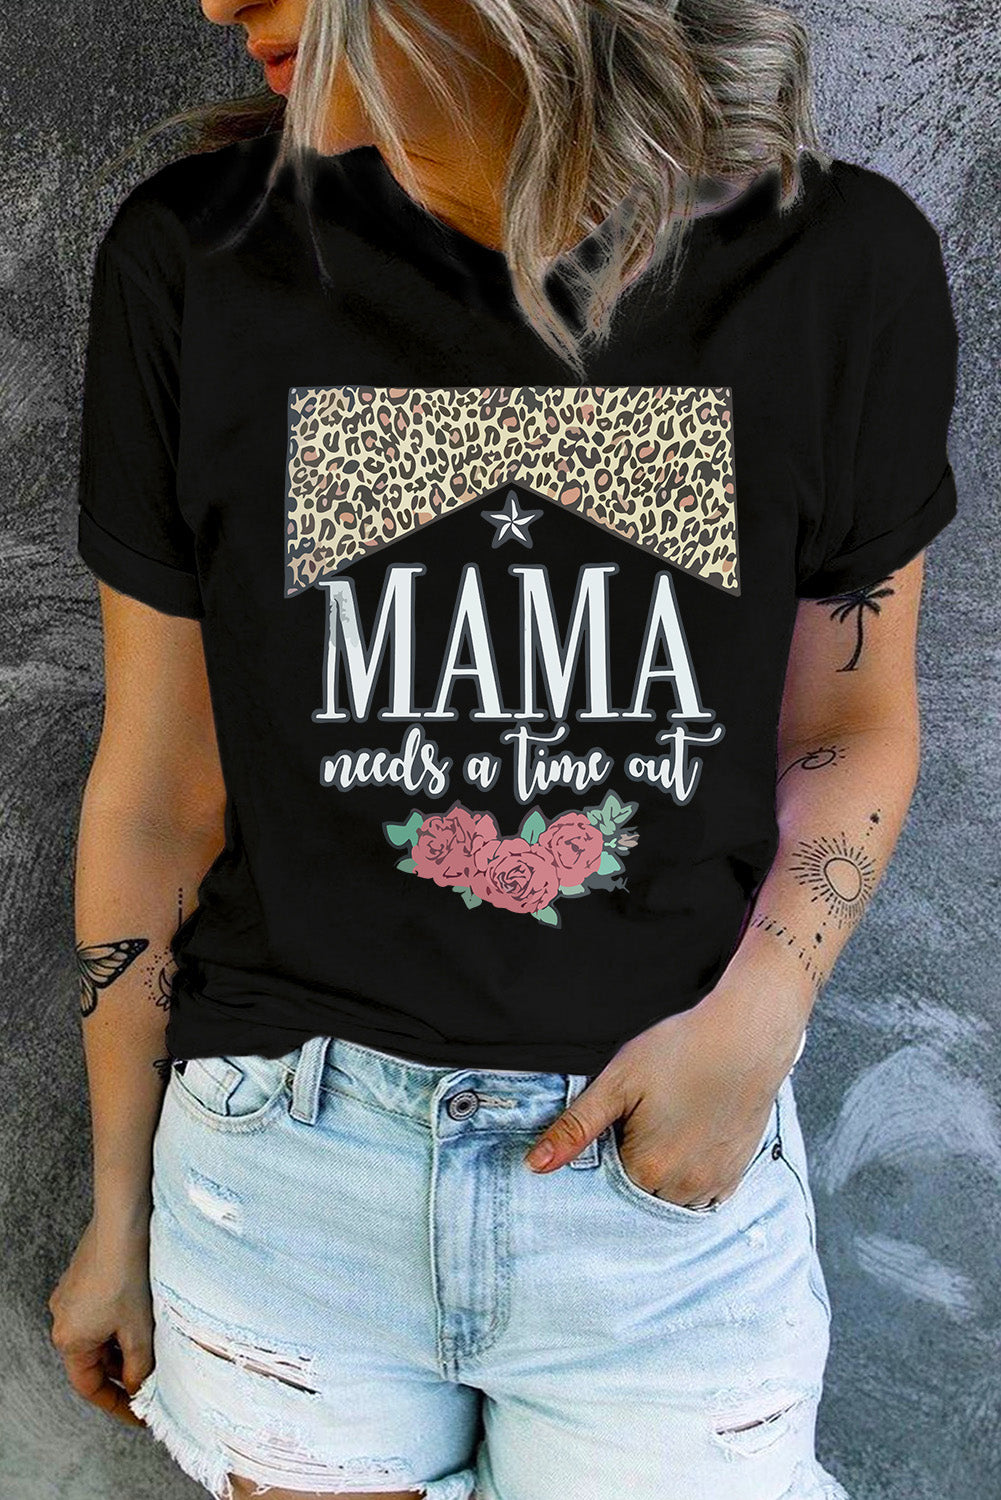 MAMA NEEDS A TIME OUT Graphic Tee - ONLINE ONLY 2-10 DAY SHIPPING